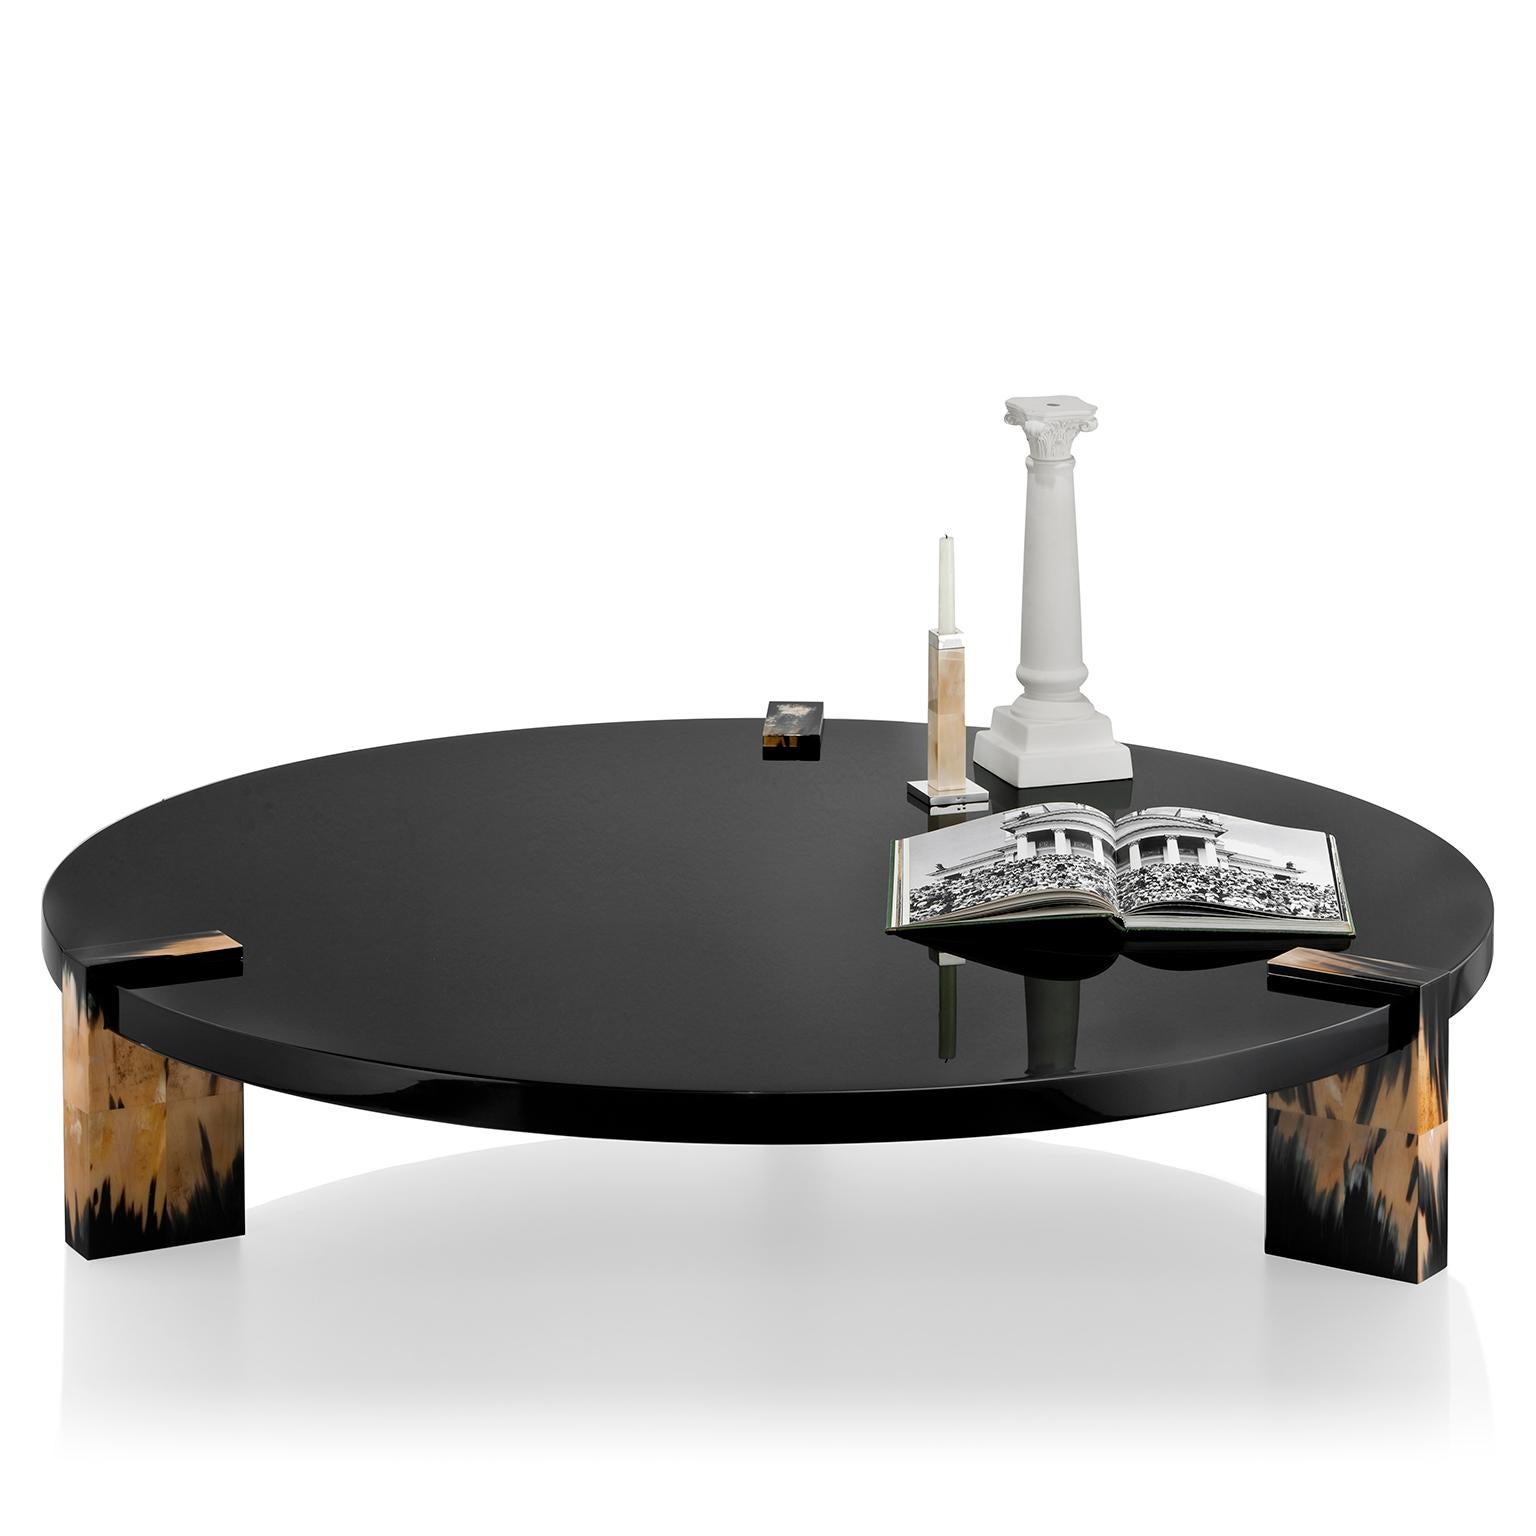 Featuring a round tabletop in wood with lacquered black gloss finish, Paestum coffee table is embellished by three elegant legs in Corno Italiano, whose variegated veining create a striking visual effect drawing attention and attraction to the